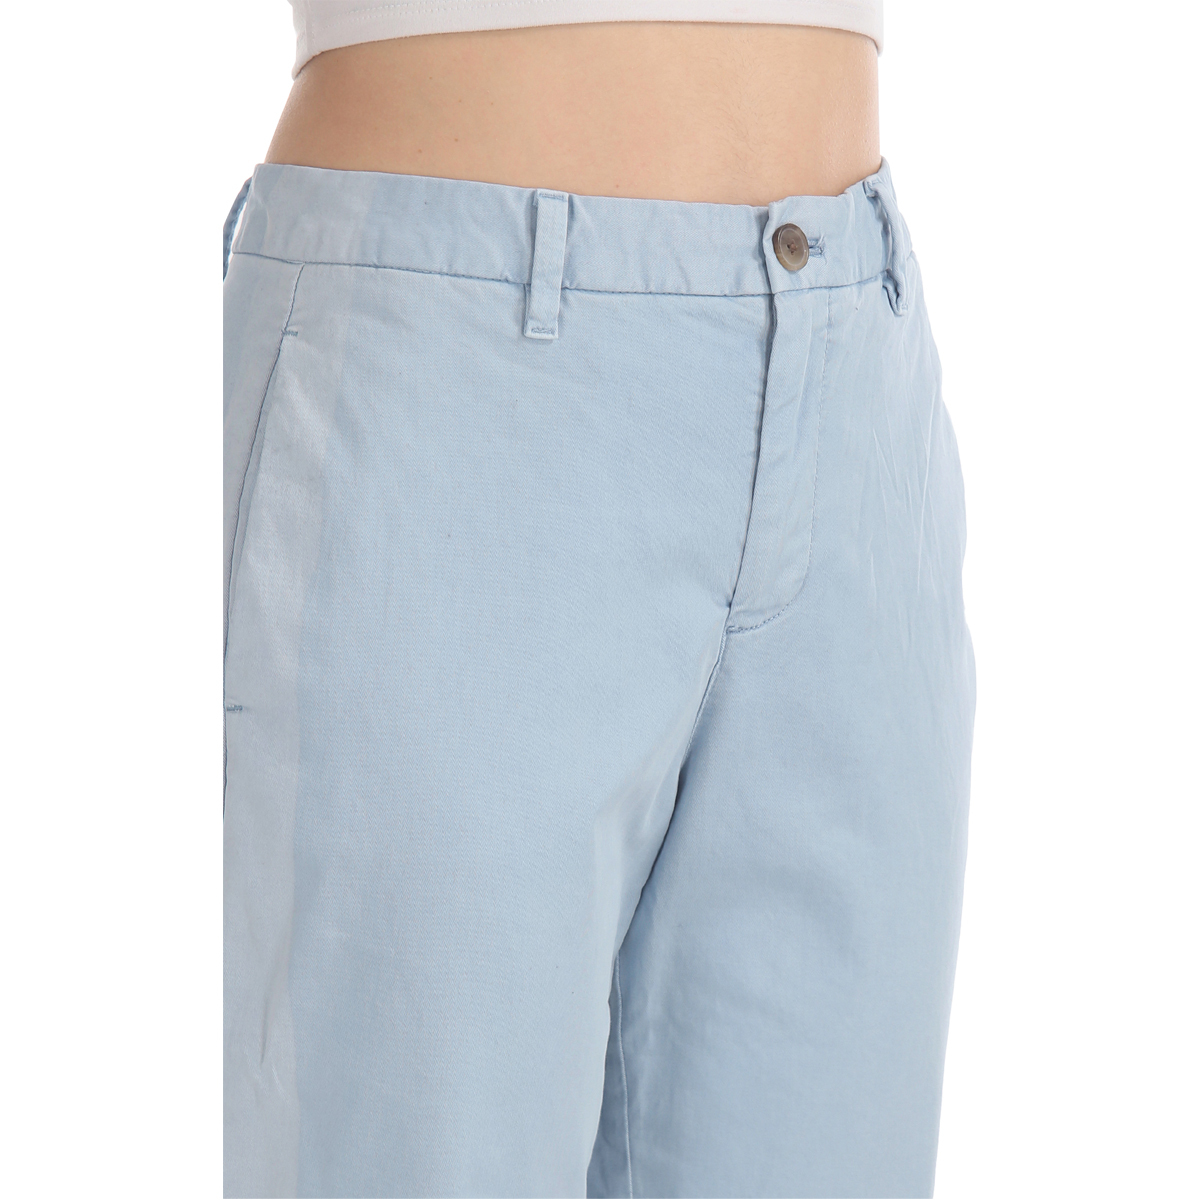 Gap Mid Rise Girlfriend Fit Solid Color Trouser Styled with Raw Hem & Faded Side Seam Line - Blue, Size-2